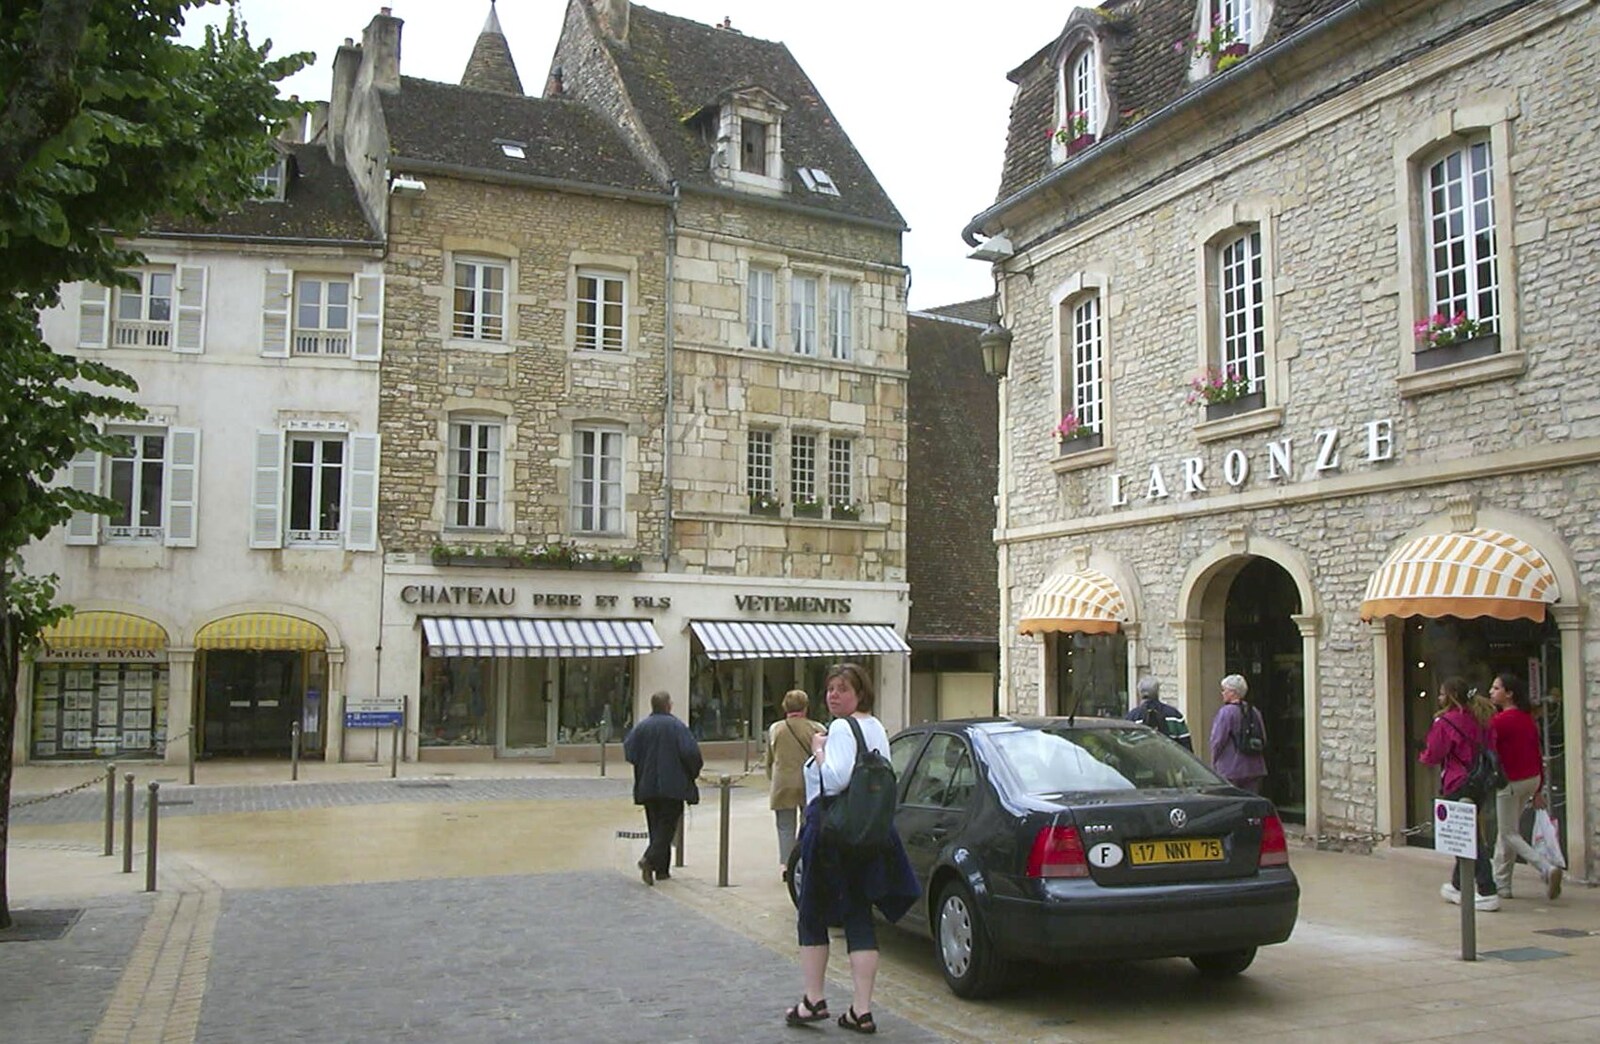 Sis roams through the streets of Beaune from A Short Holiday in Chivres, Burgundy, France - 21st July 2001